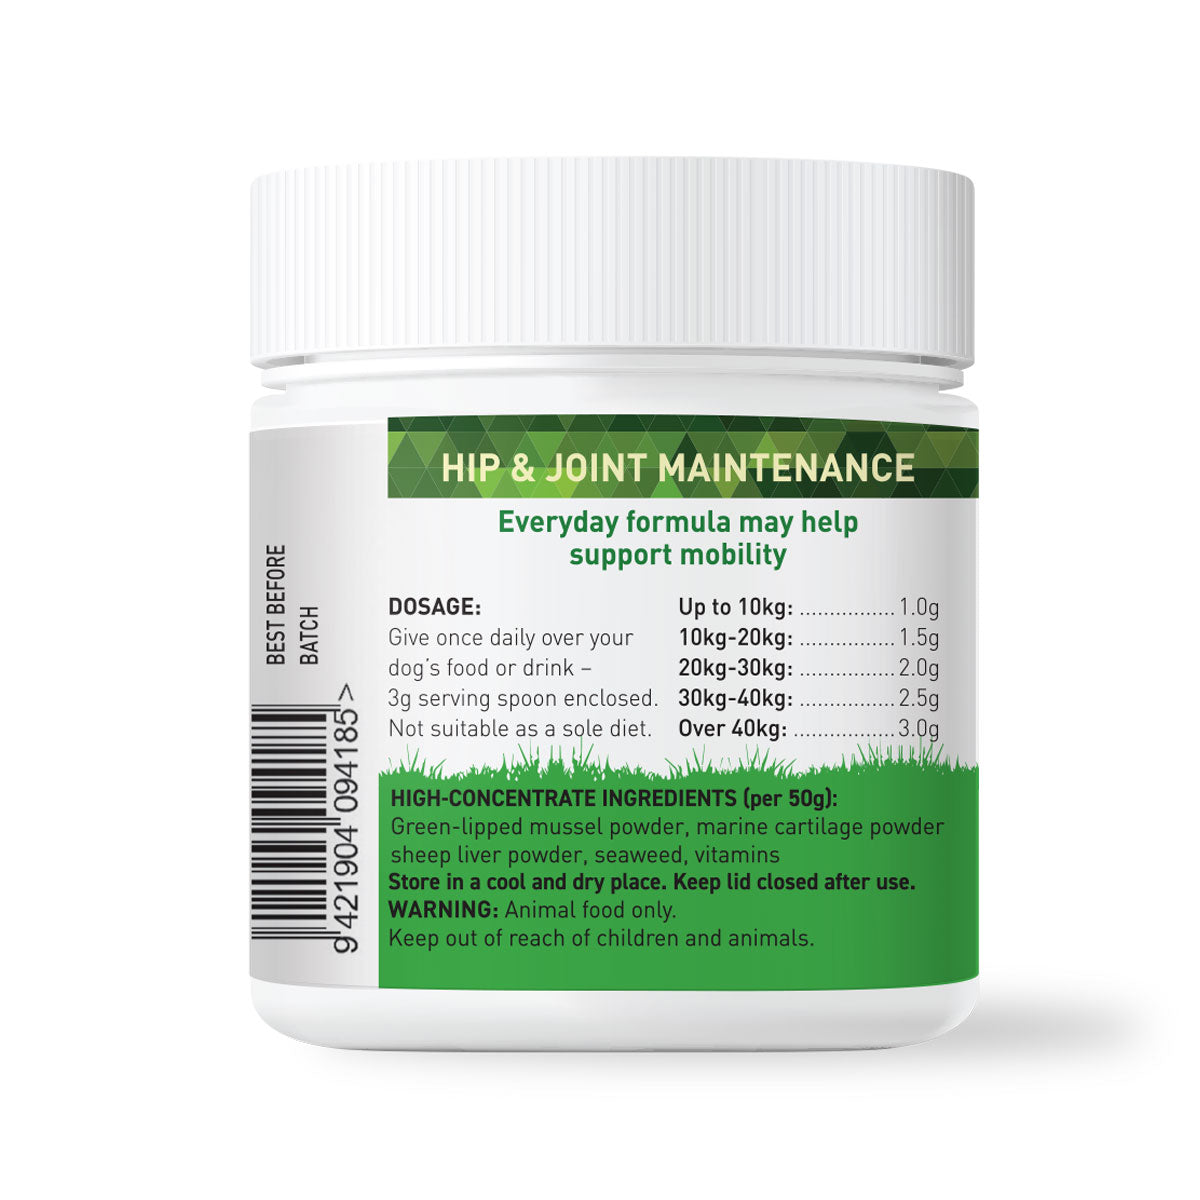 Nutreats Vitals Hip & Joint powder for dogs - supporting naturally healthy hips and joints in dogs. Rich in Omega 3 and a rich source of chondroitin. totally natural feed supplement for dogs supporting healthy hips and joints. Everyday formula to help support your dog's mobility.